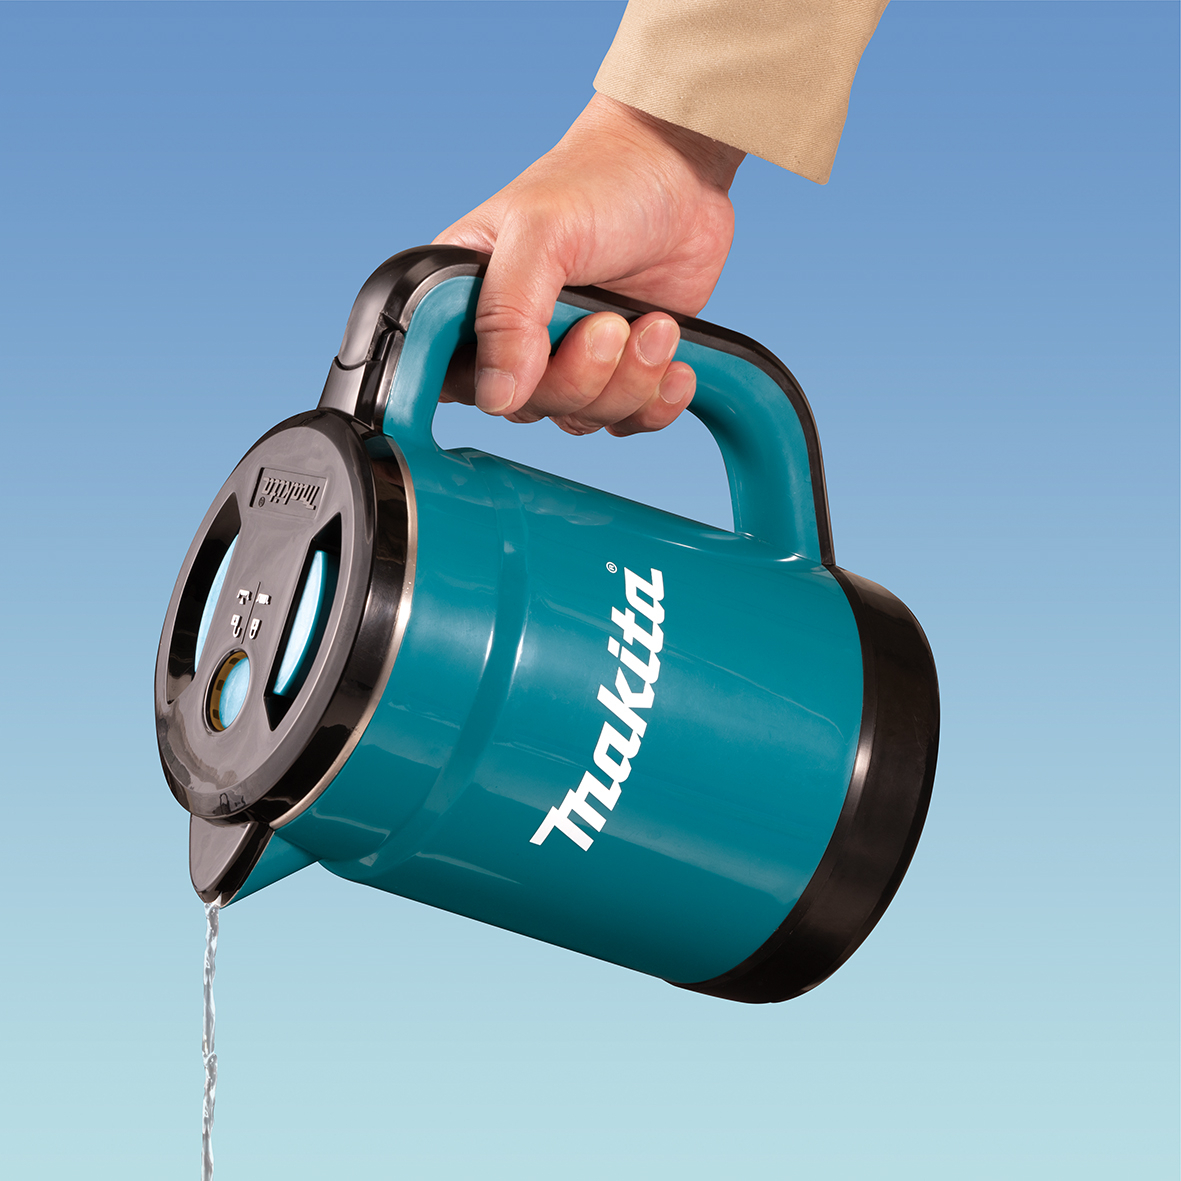 New Makita 18V X2 Cordless Kettle for Instant Noodles & More